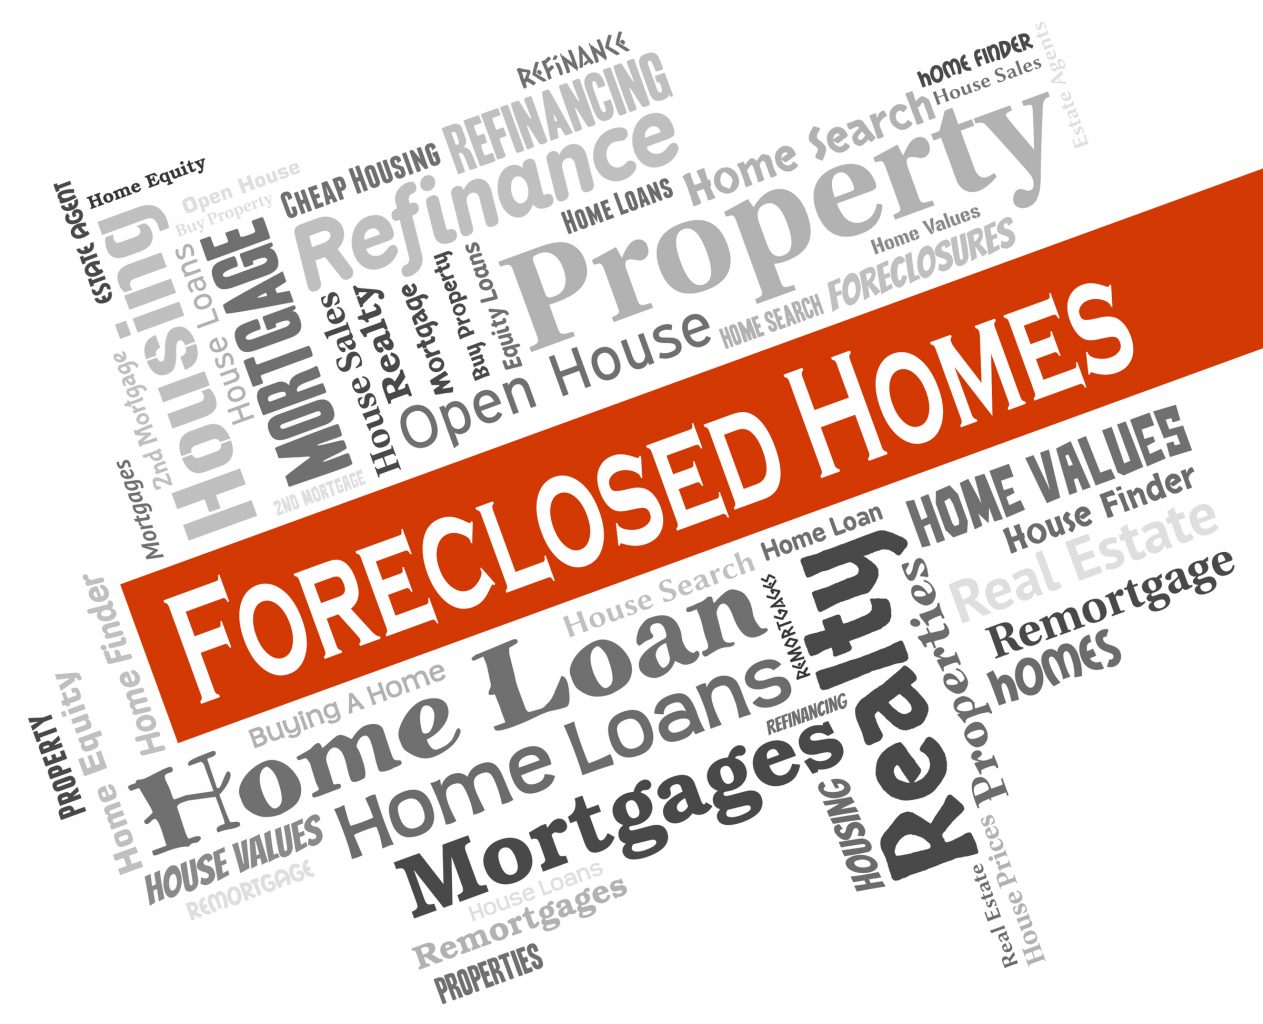 New Orleans West Bank Foreclosures